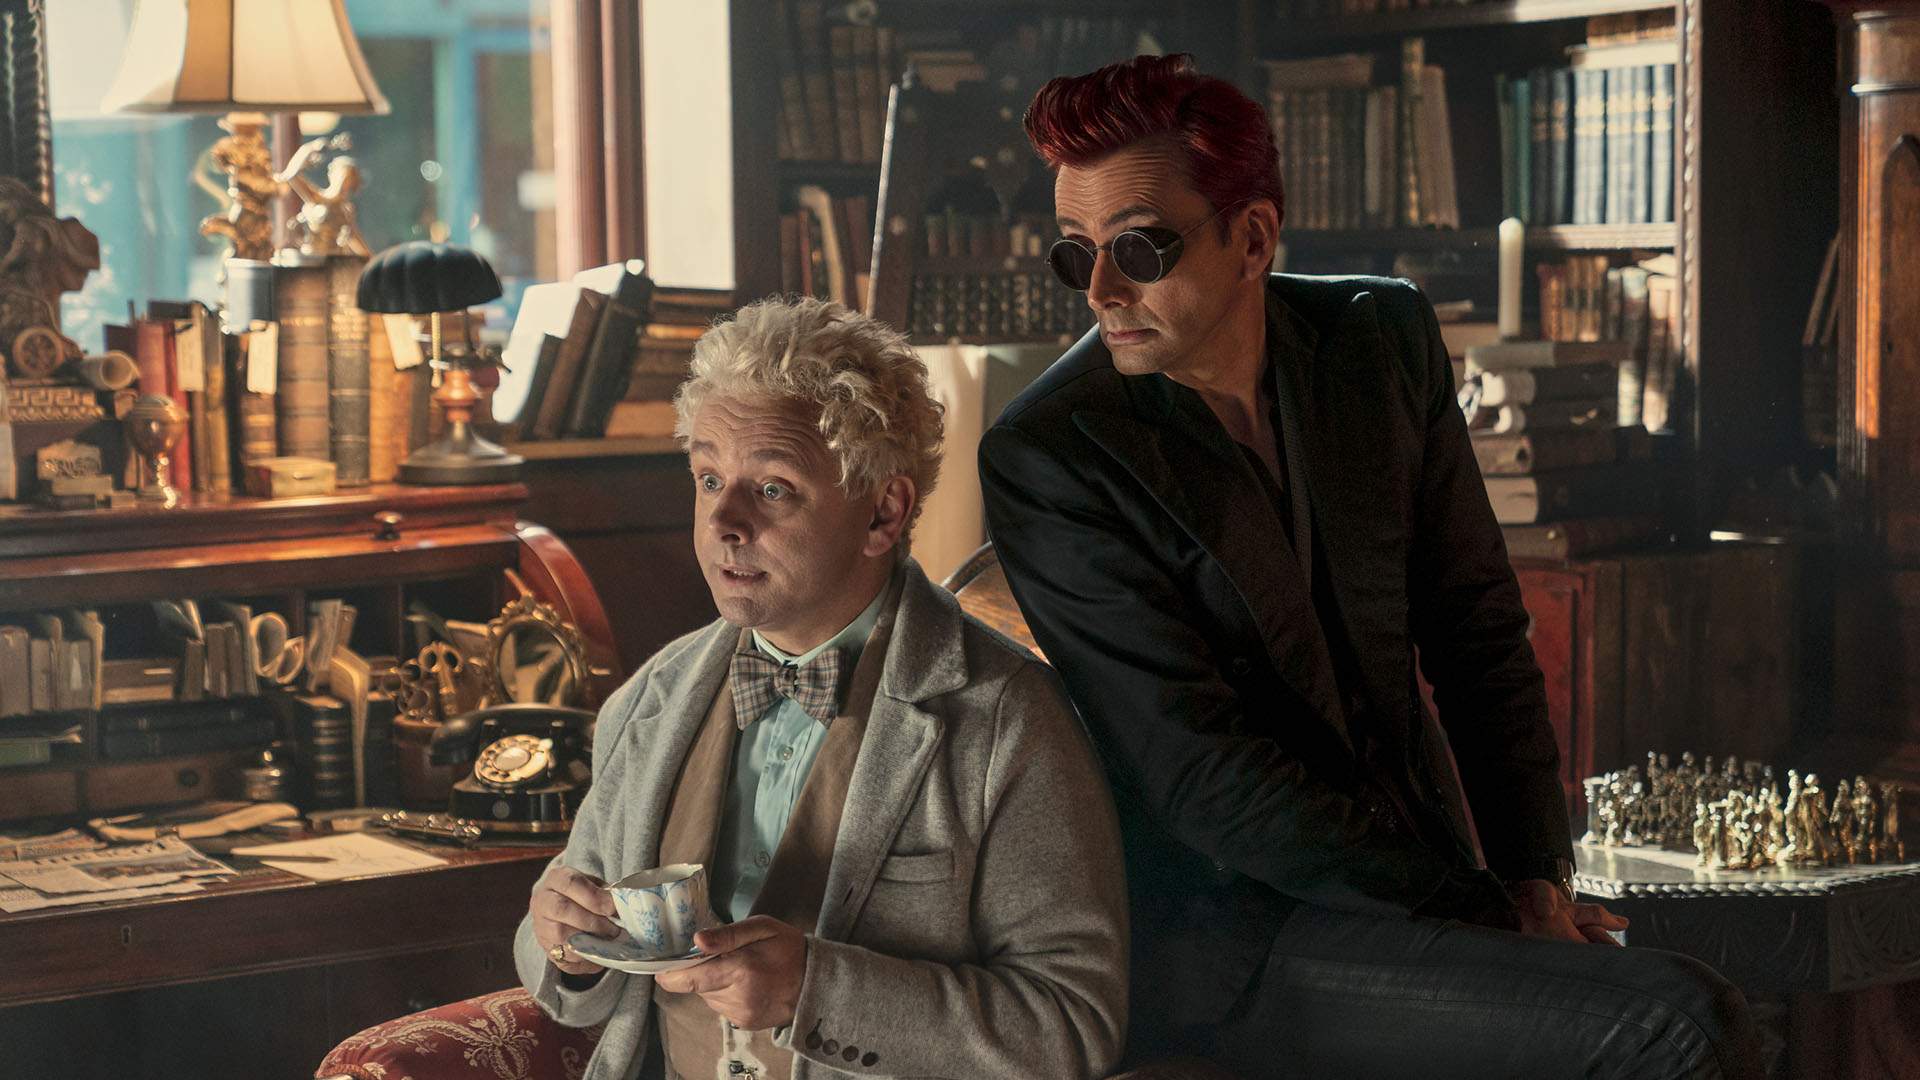 Michael Sheen and David Tennant Still Make a Supremely Heavenly Duo in 'Good Omens' Season Two